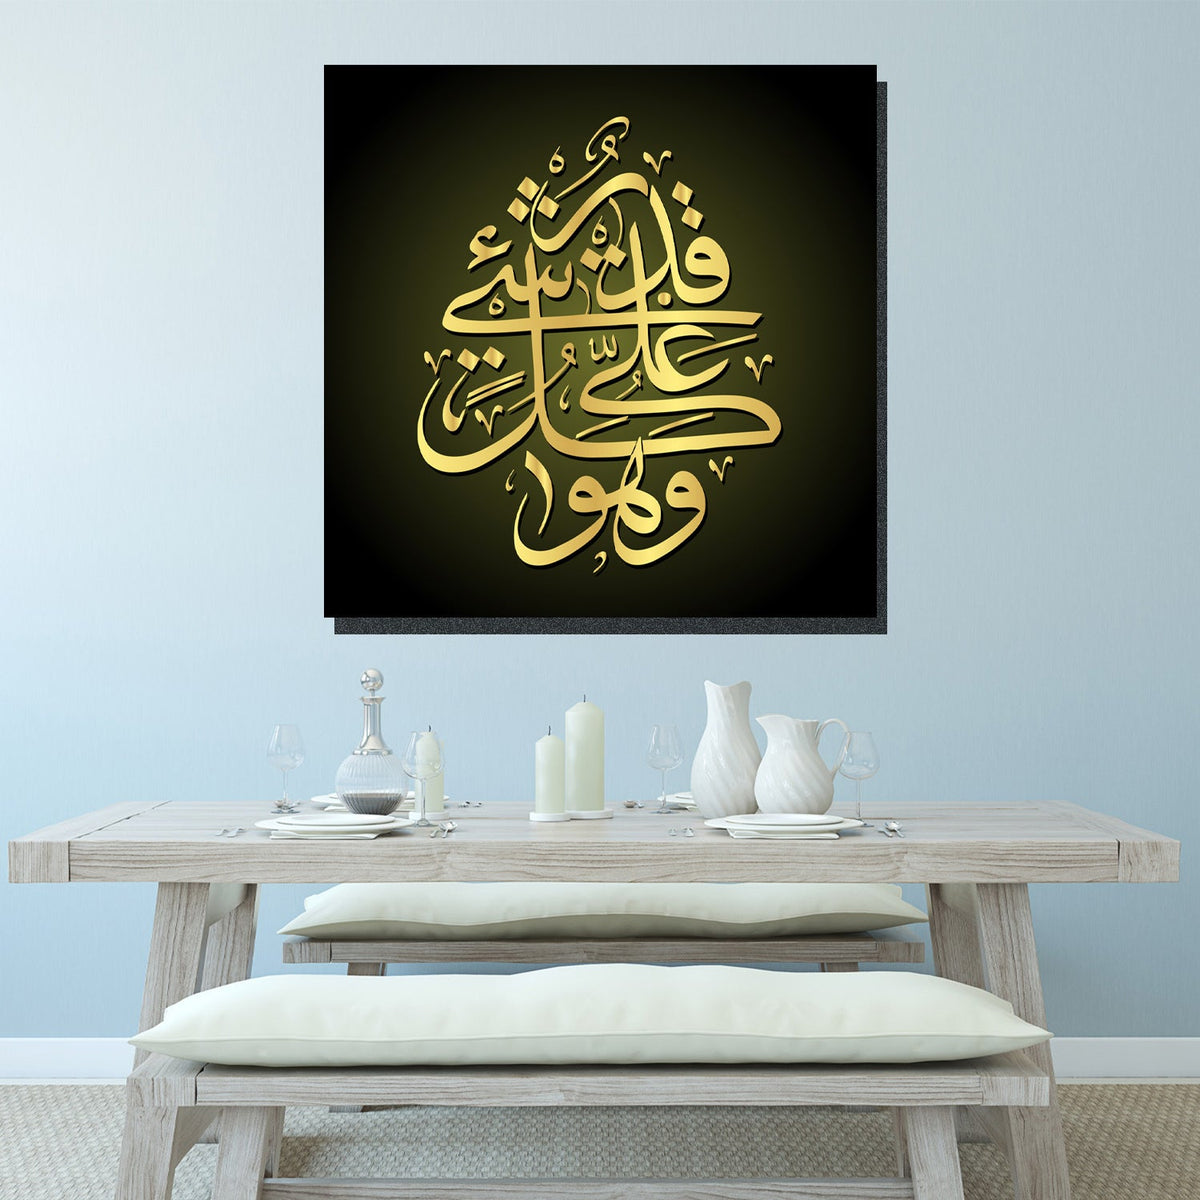 https://cdn.shopify.com/s/files/1/0387/9986/8044/products/IslamicArtLimitedEdition17CanvasArtprintStretched-3.jpg